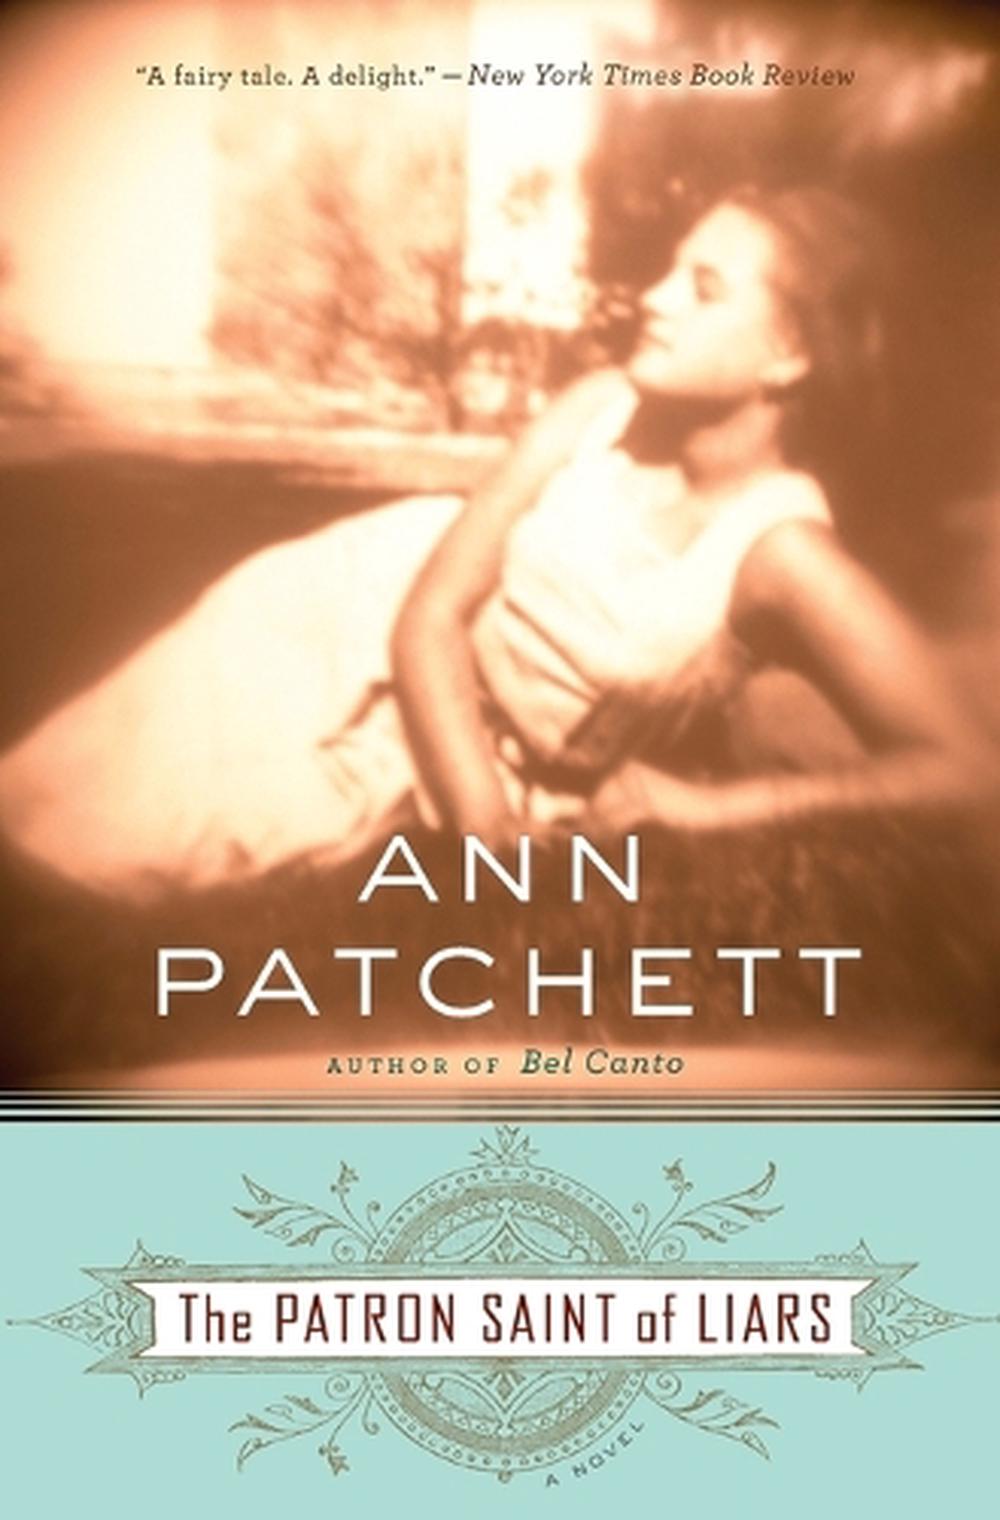 Patchett,　Saint　at　by　online　of　The　Paperback,　Liars　Buy　Ann　The　9780547520209　Patron　Nile